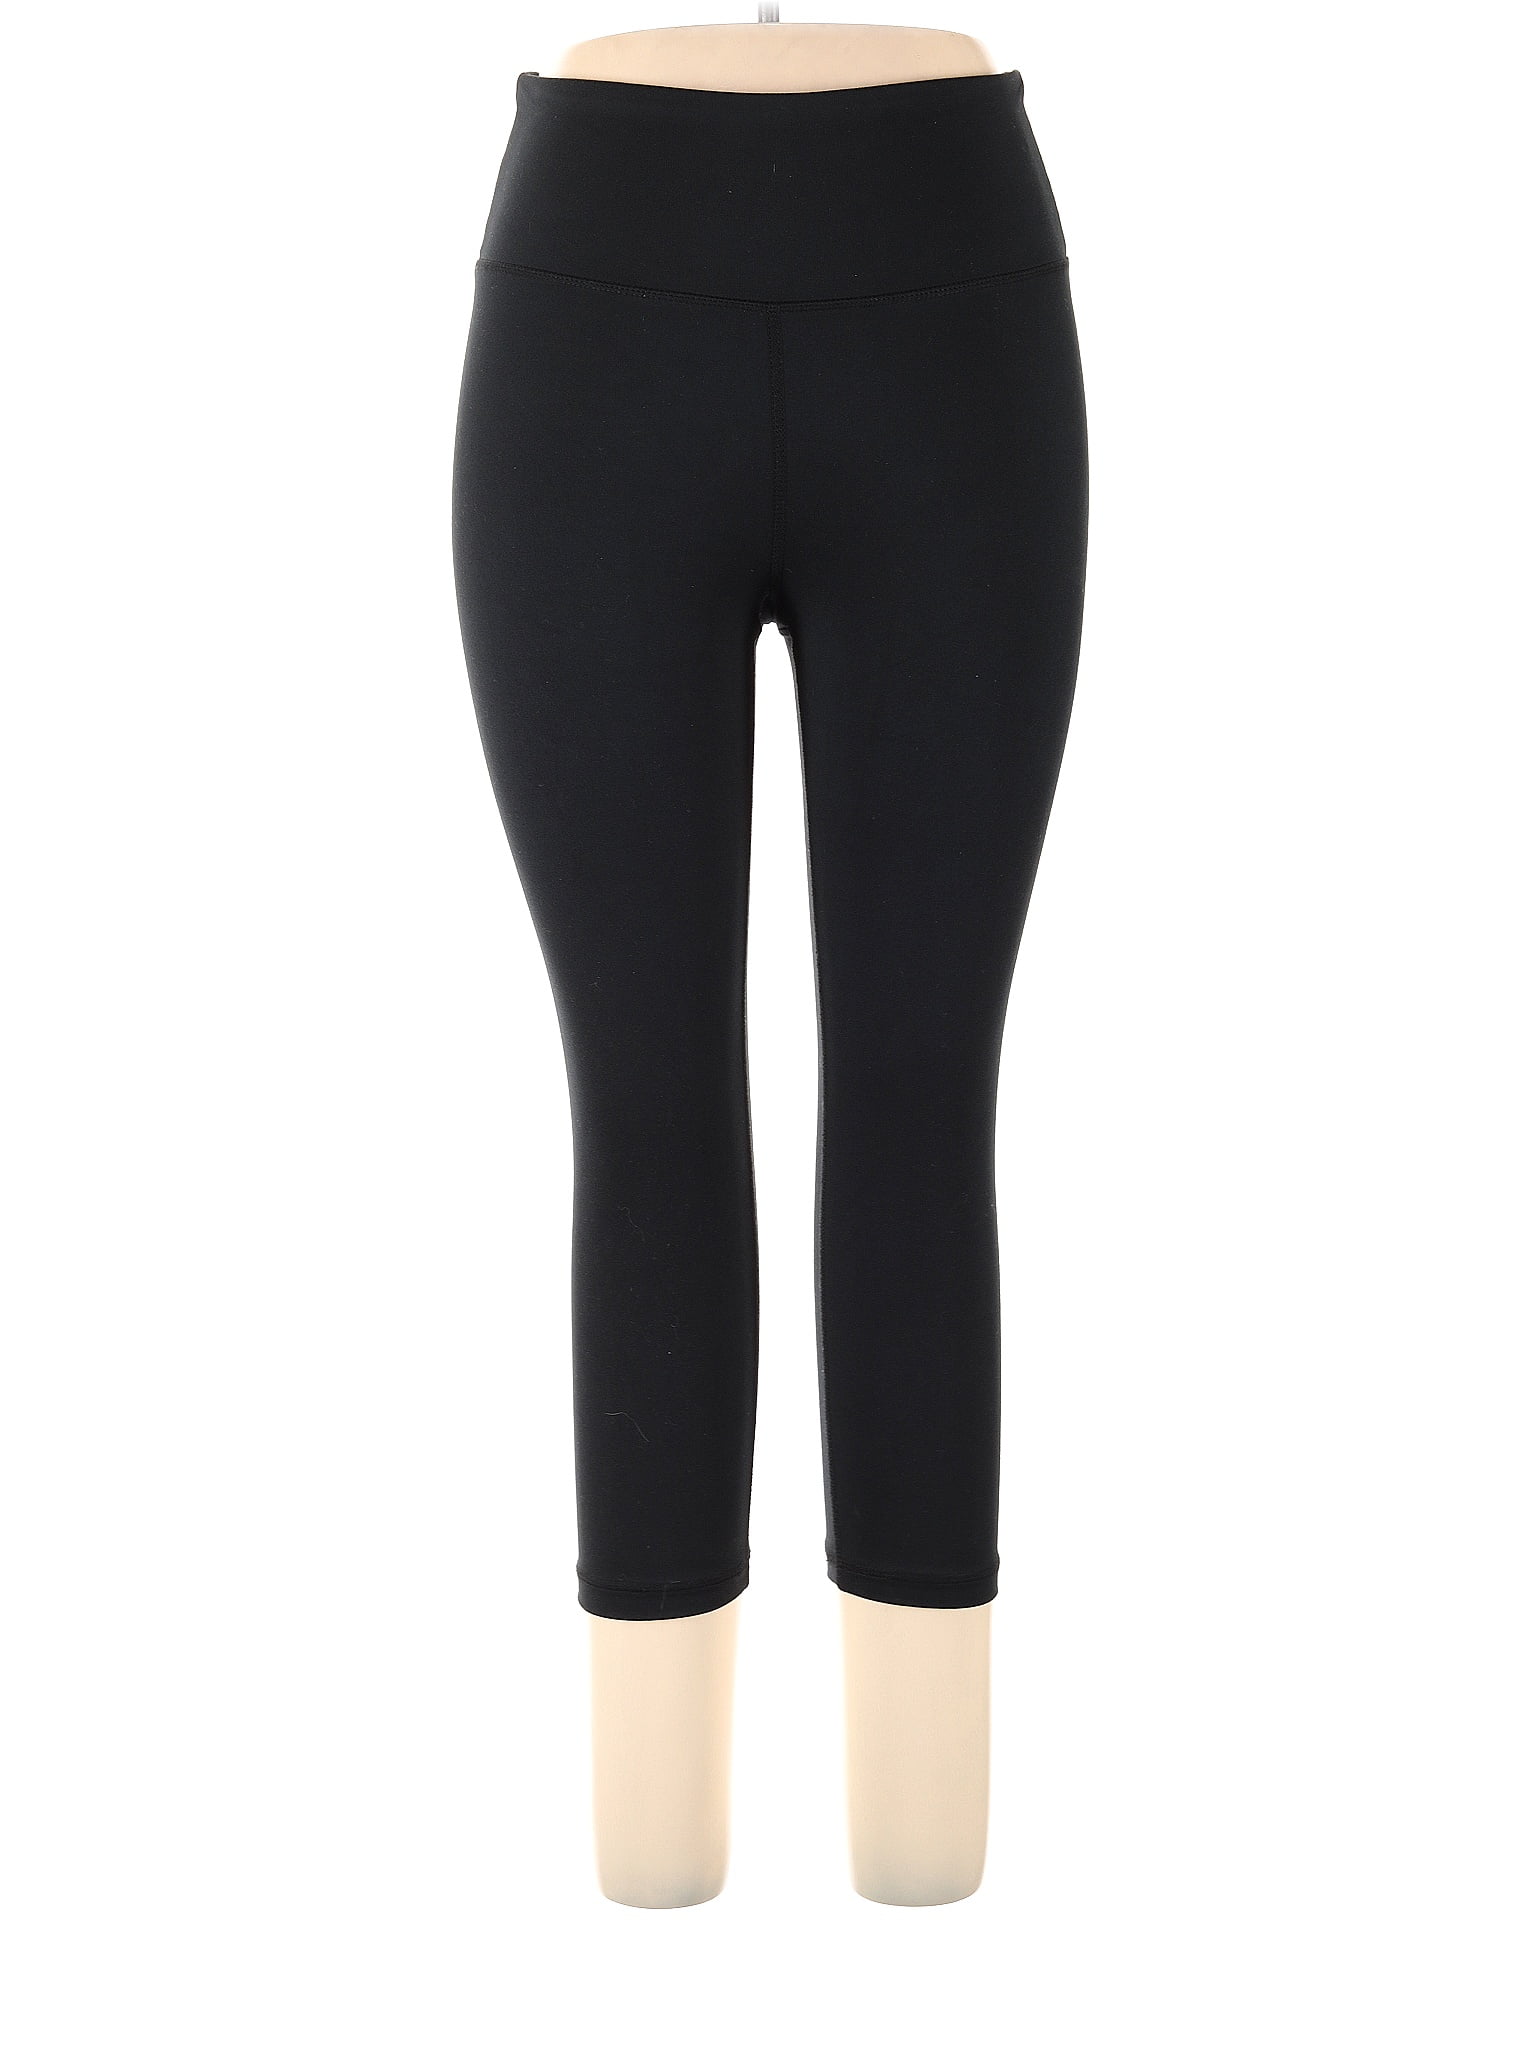 Balance Collection Solid Black Active Pants Size XL - 71% off